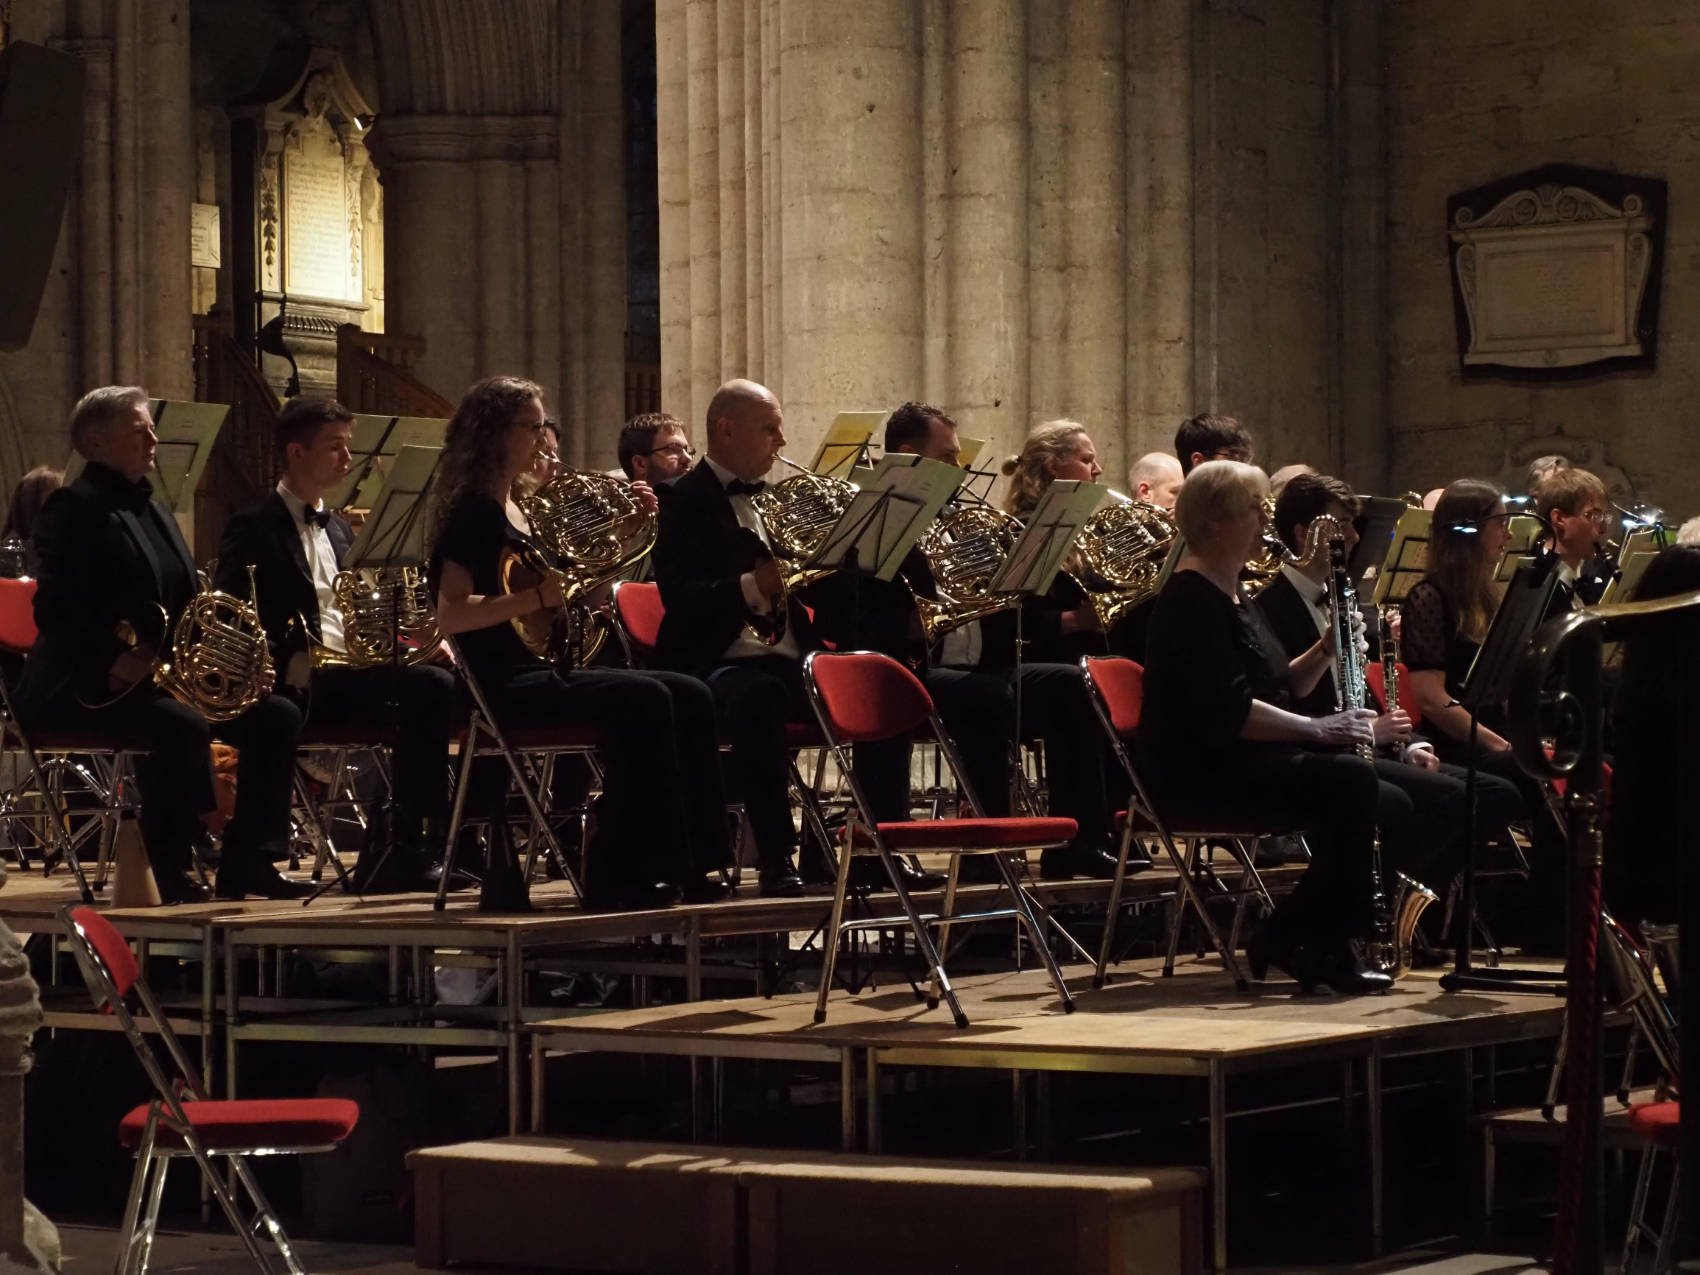 On Saturday 22 April 23, St Cecilia Orchestra joined forces with the Horns of Opera North for a spring concert of Horns and Heroes